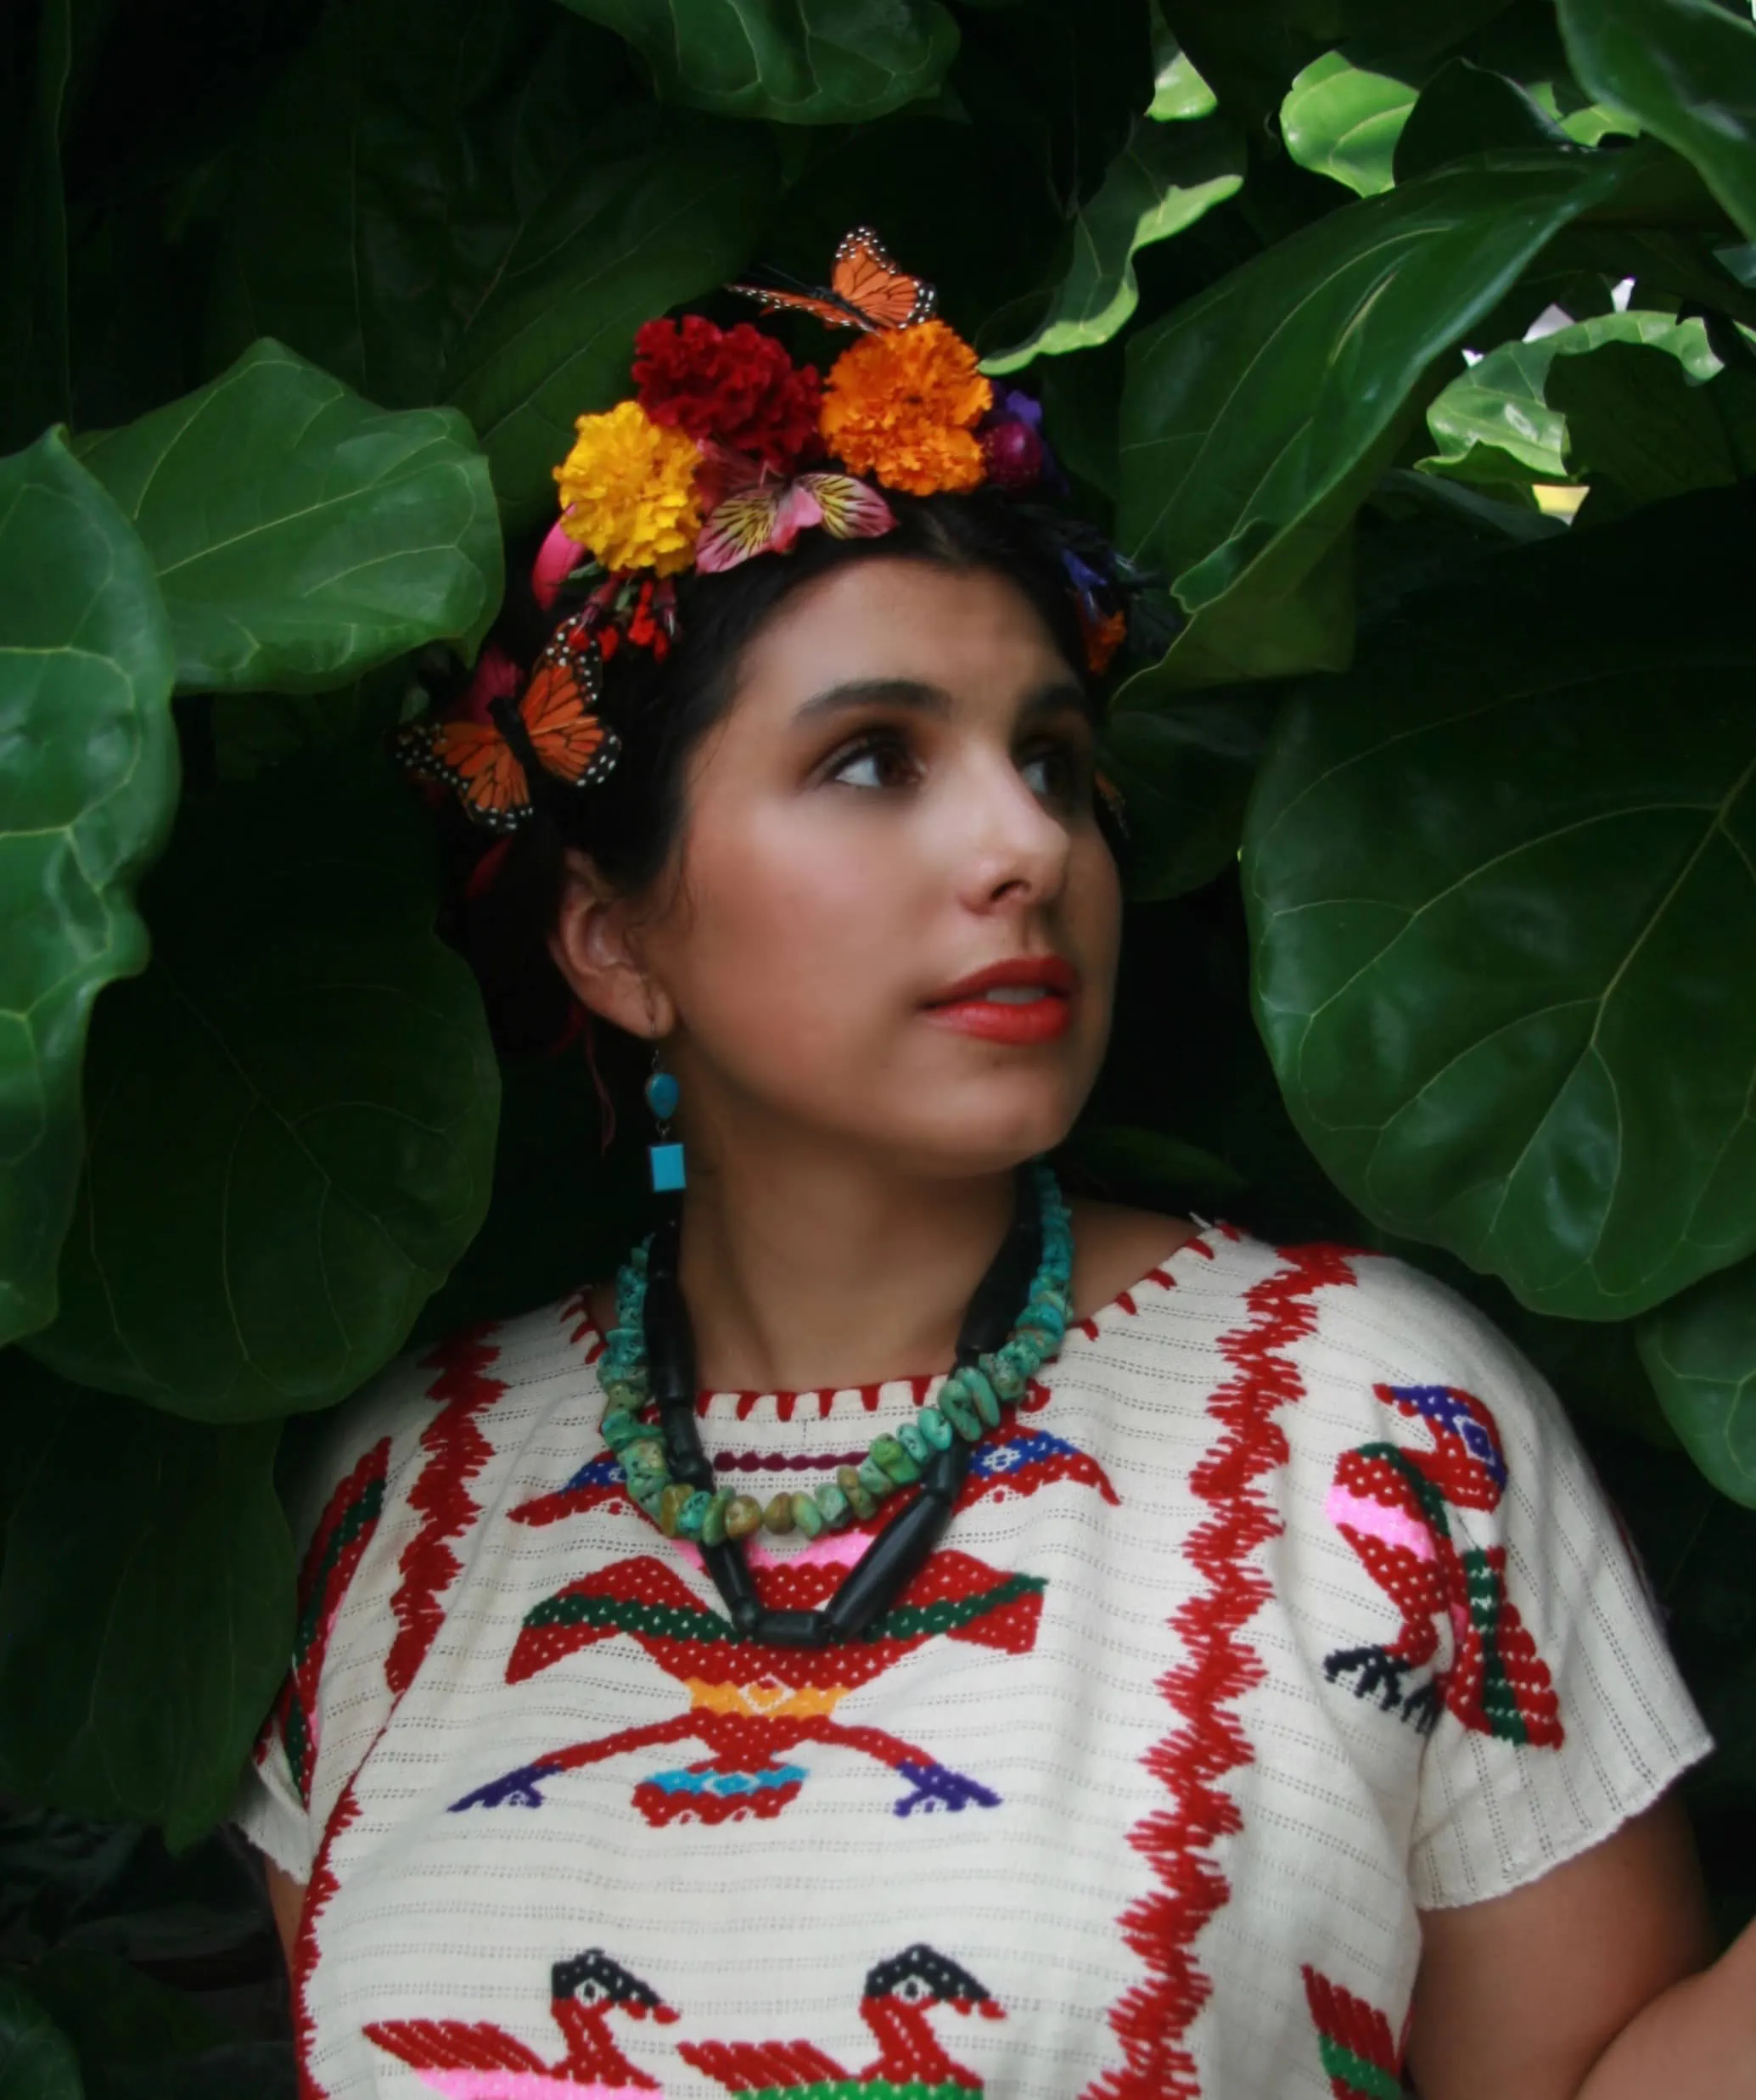 Michelle is wearing a traditional Mexican embroidered blouse and stone necklaces. She has flowers in her hair and is standing among leaves.